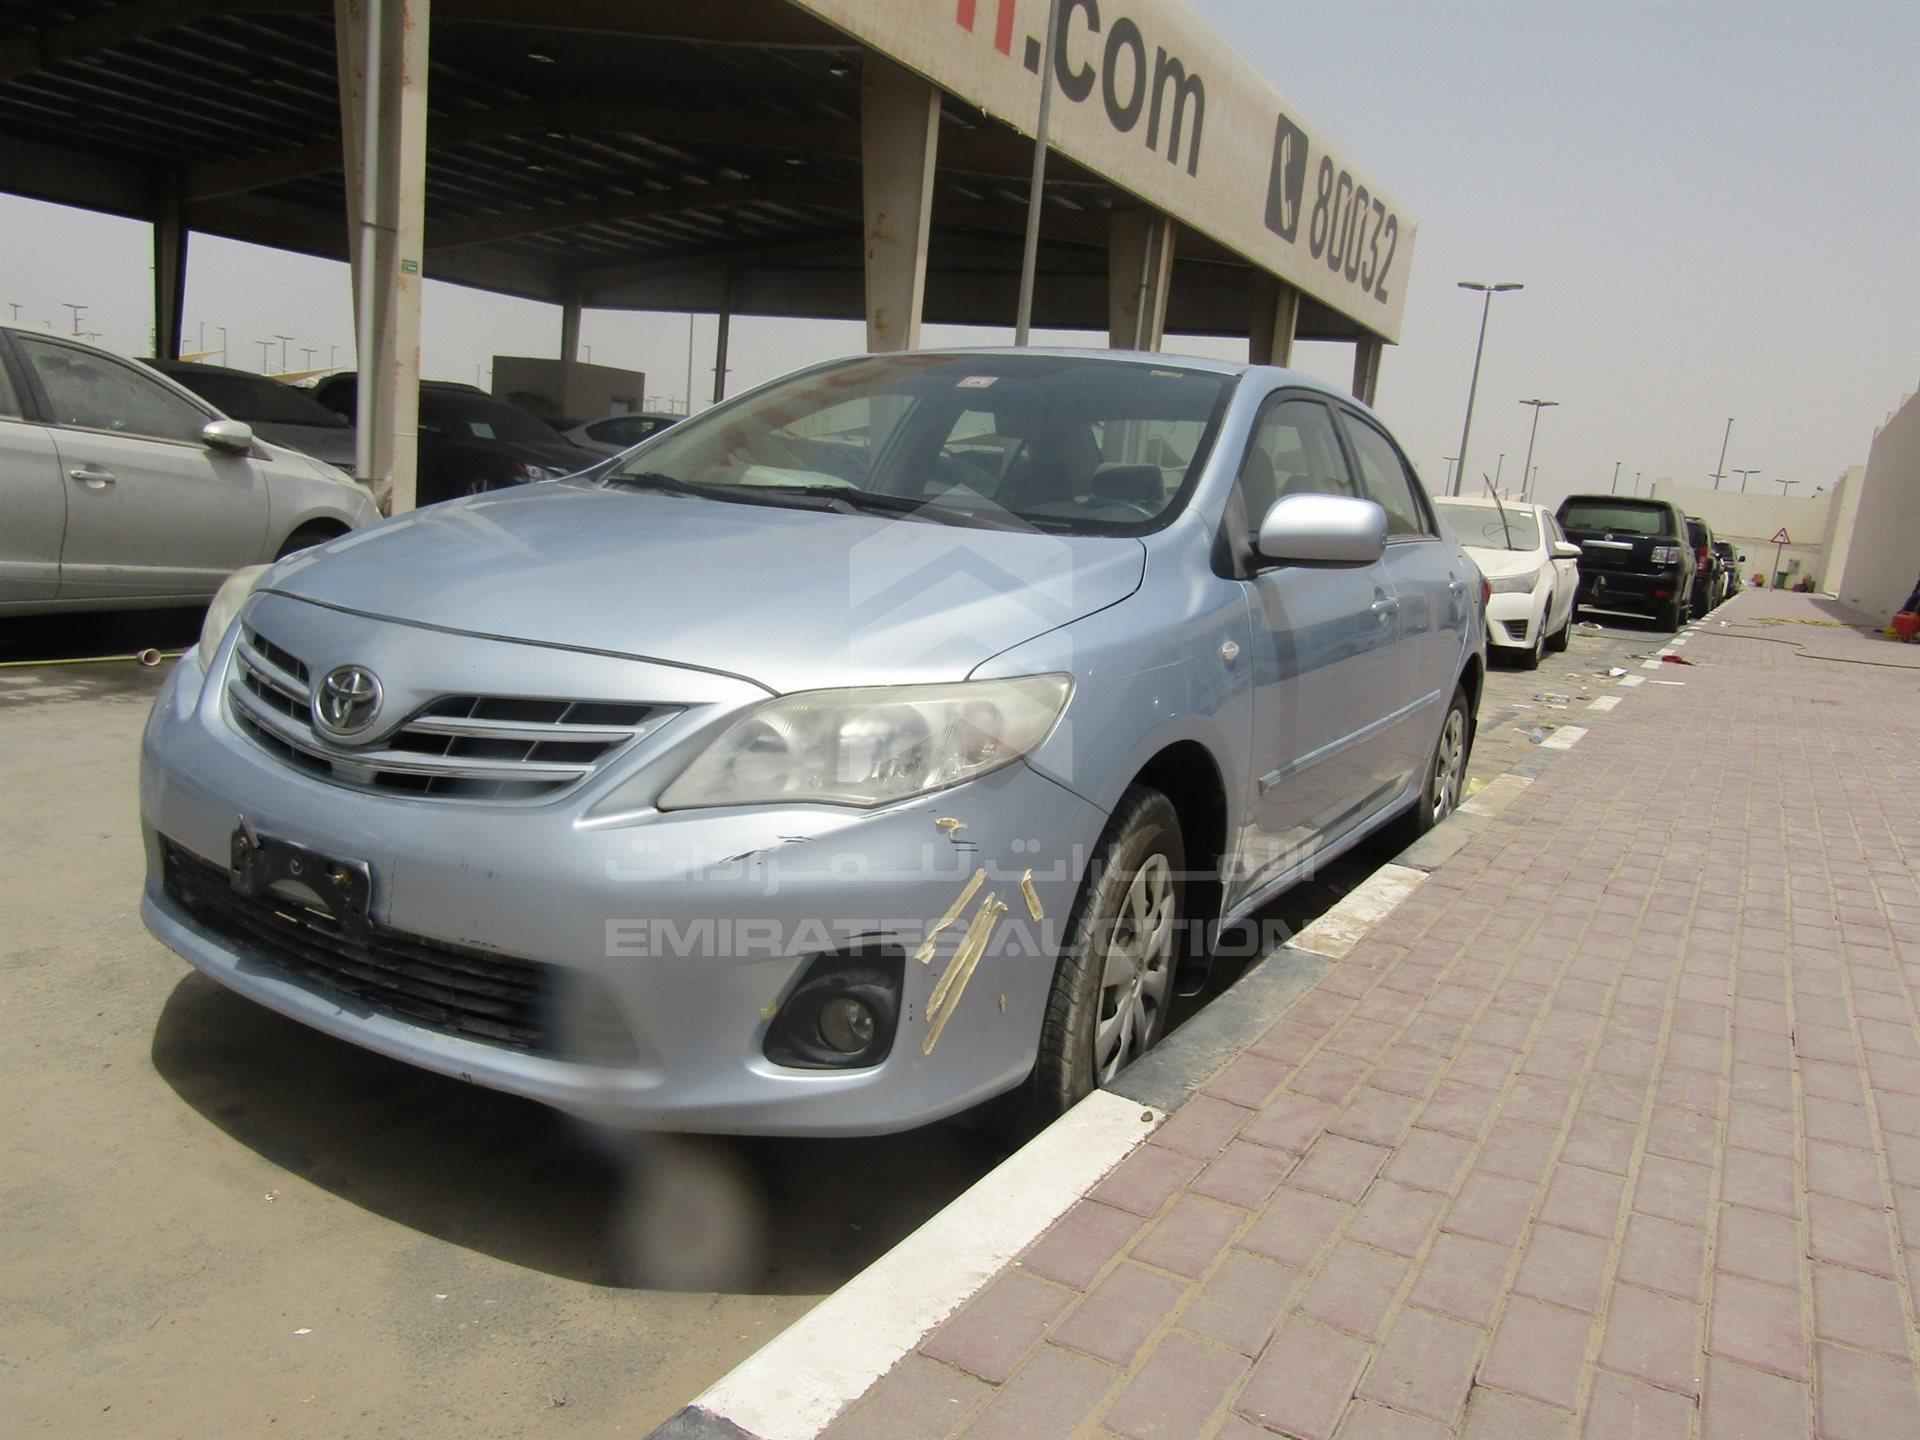 sheikh sobah second hand cars for sale